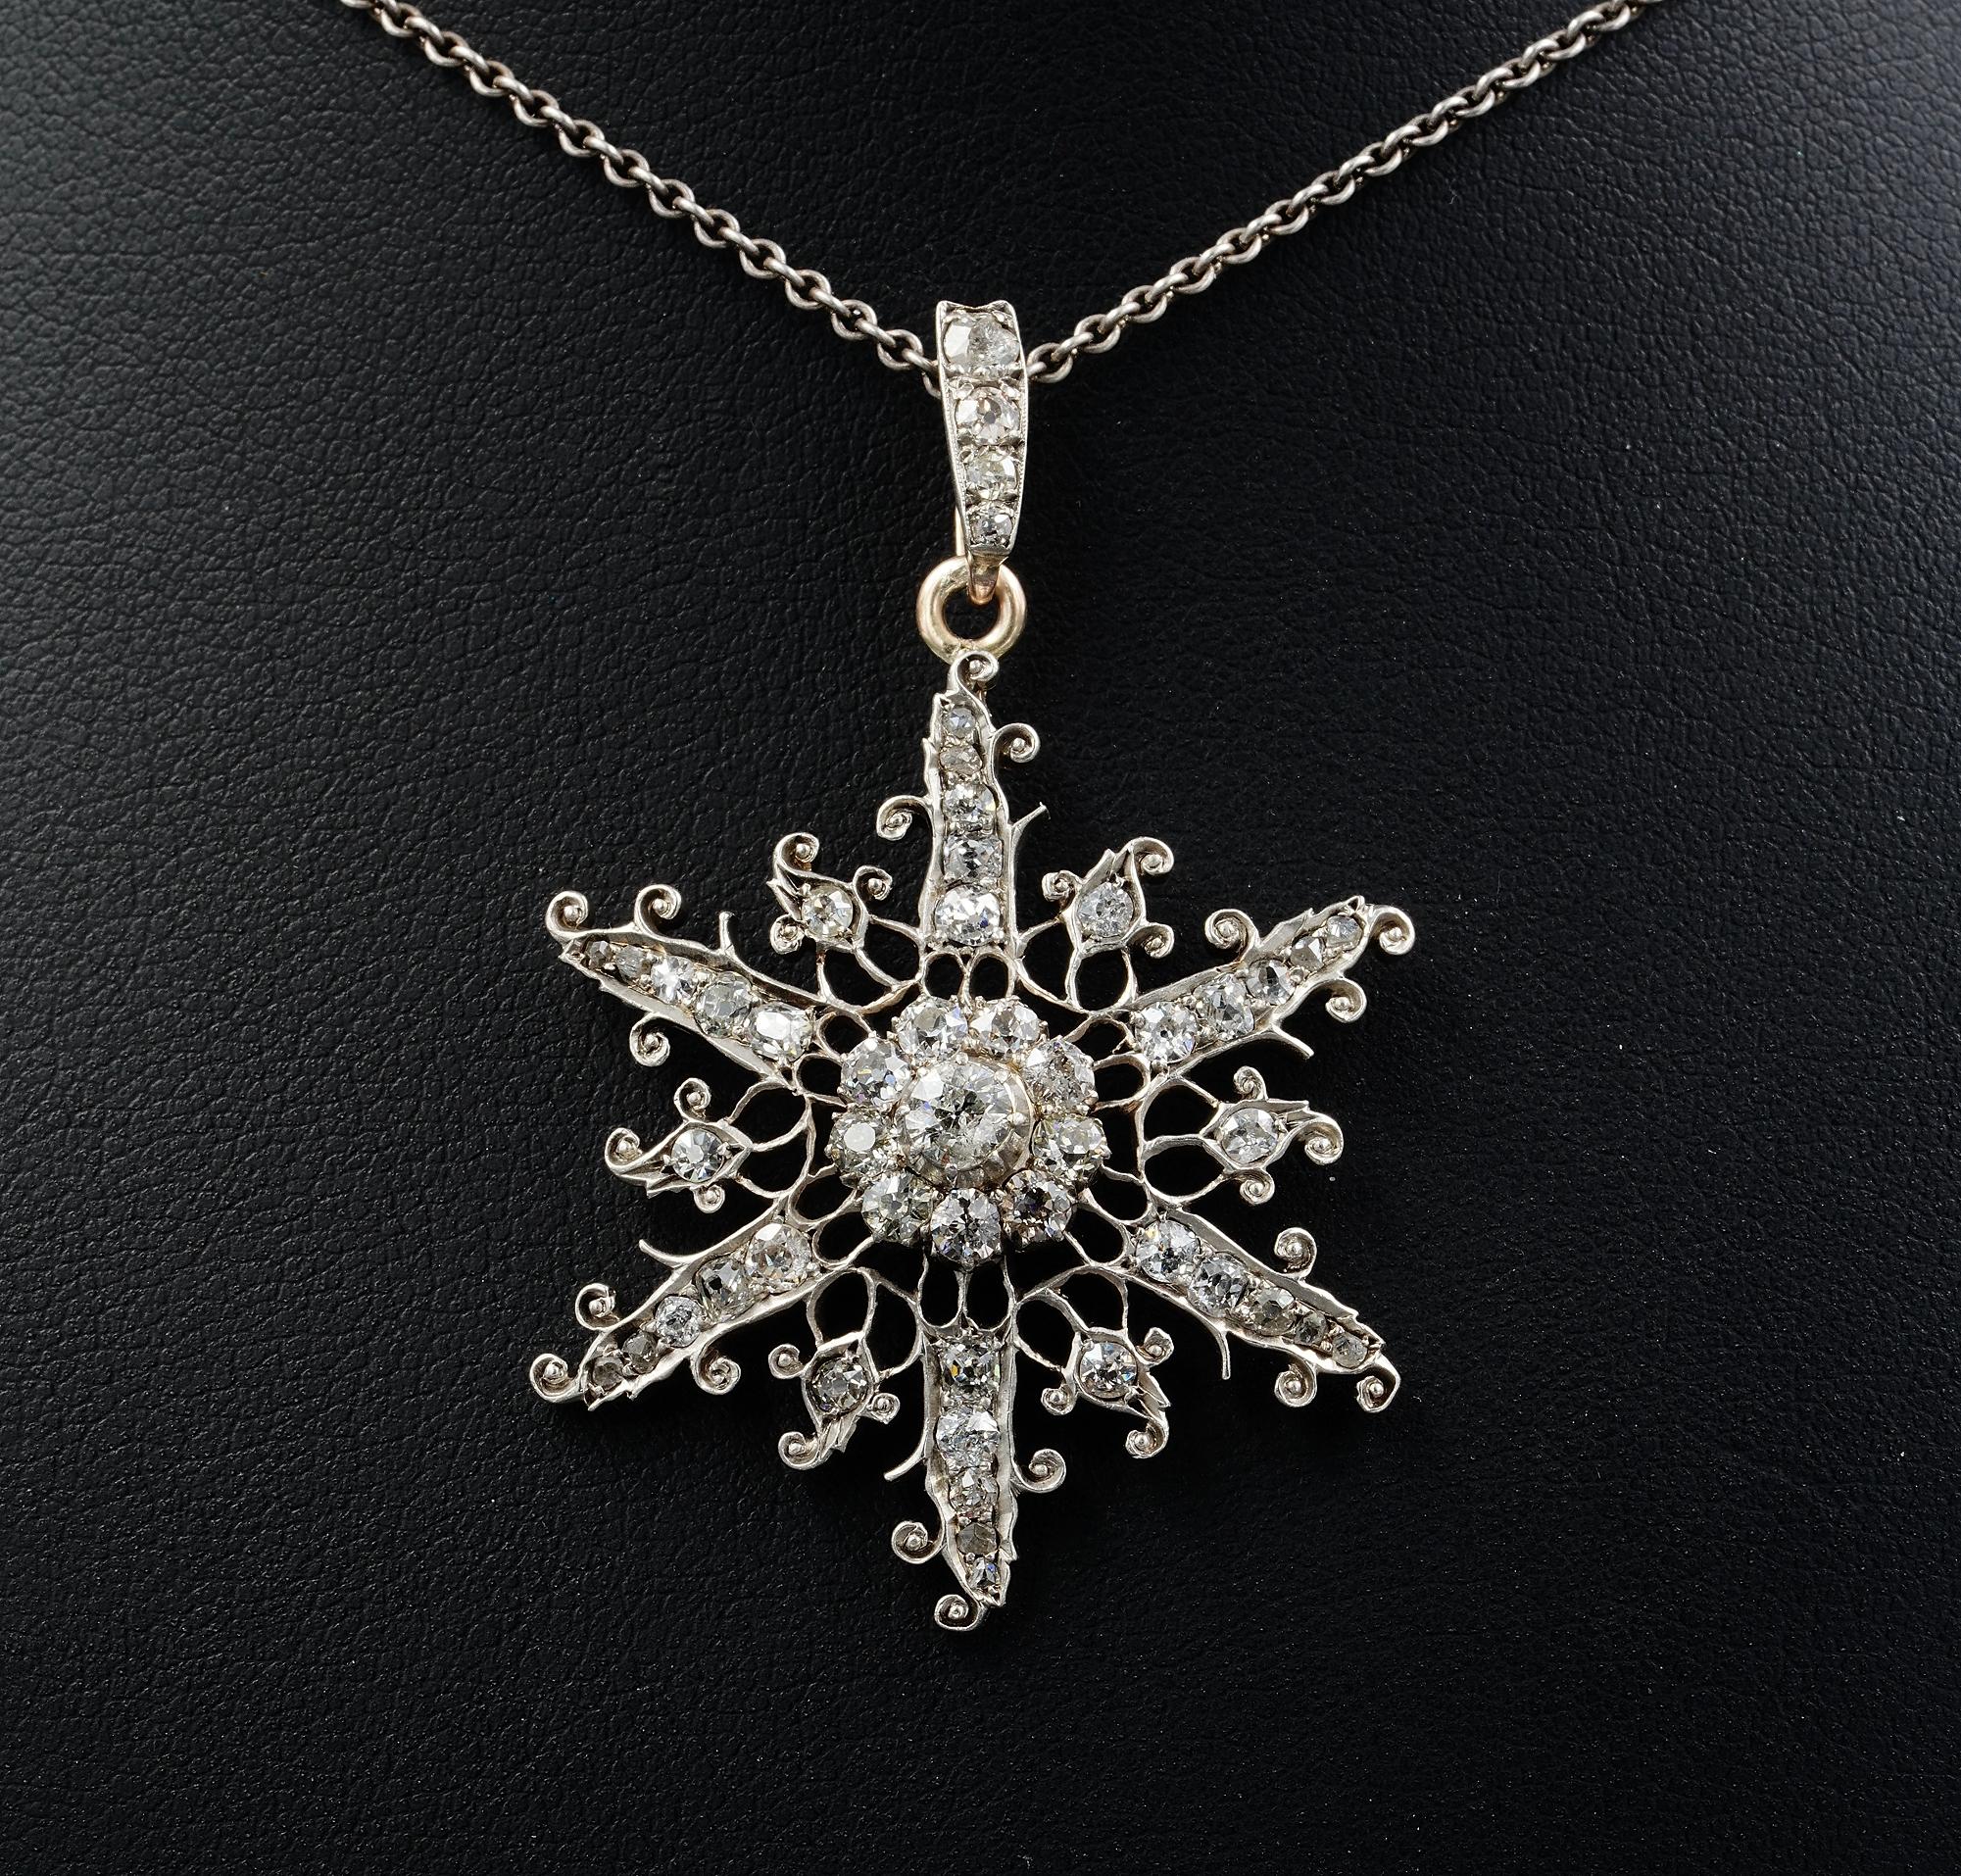 The Magic Snowflakes
Like pure white sparkles atop freshly fallen snow, a tribute to the magic of nature
Edwardian period in transition to the Victorian, Diamond snowflake pendant, skilfully hand crafted of solid 18 KT gold silver topped, tested,